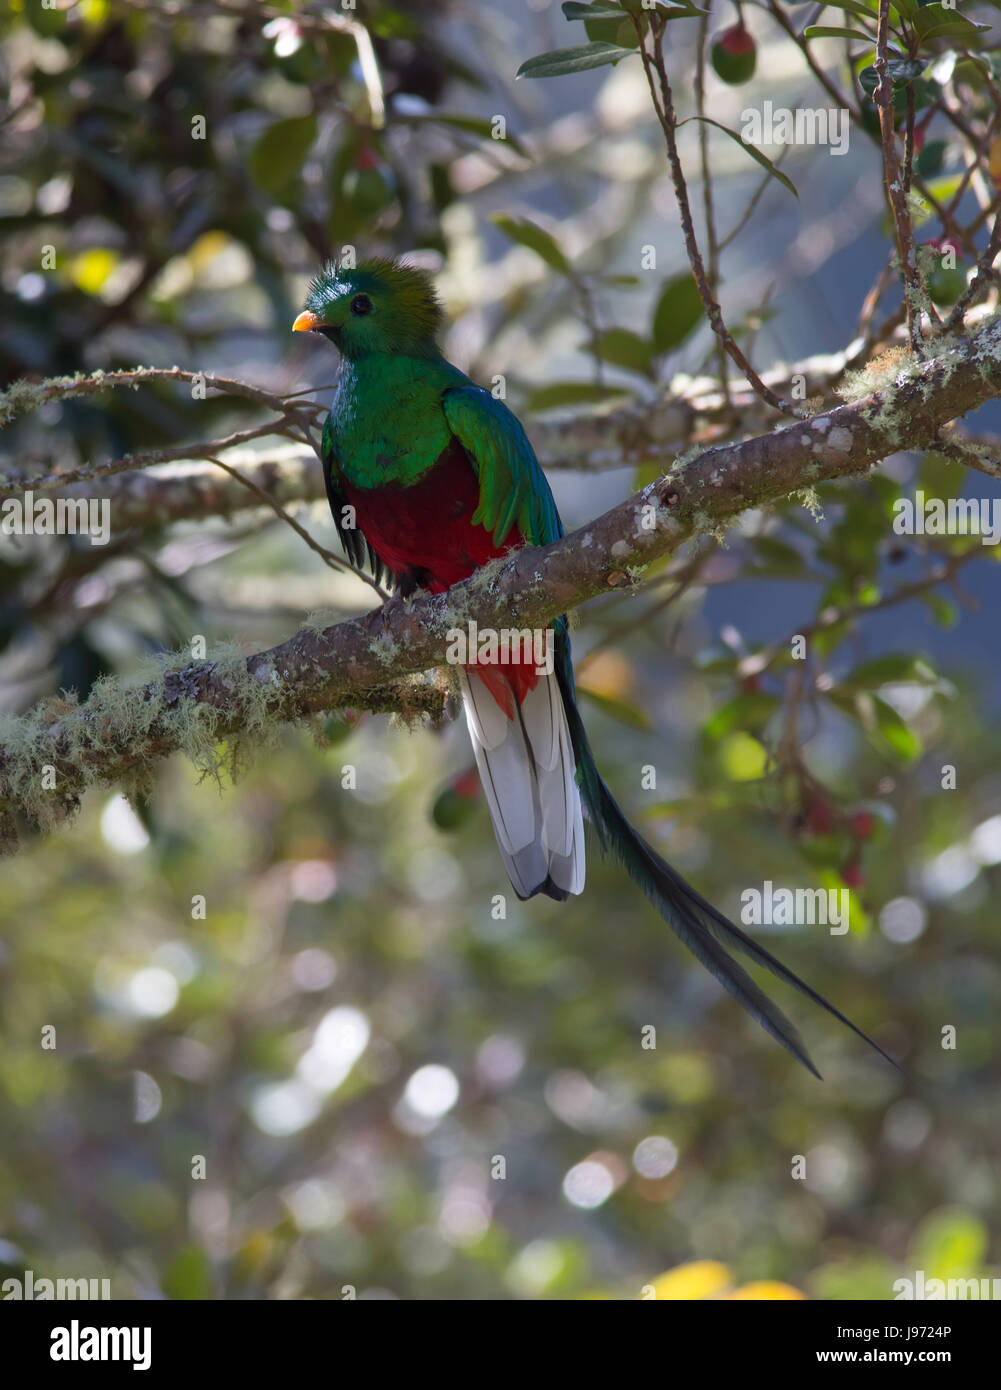 Resplendent Quetzal perched in a tree Stock Photo